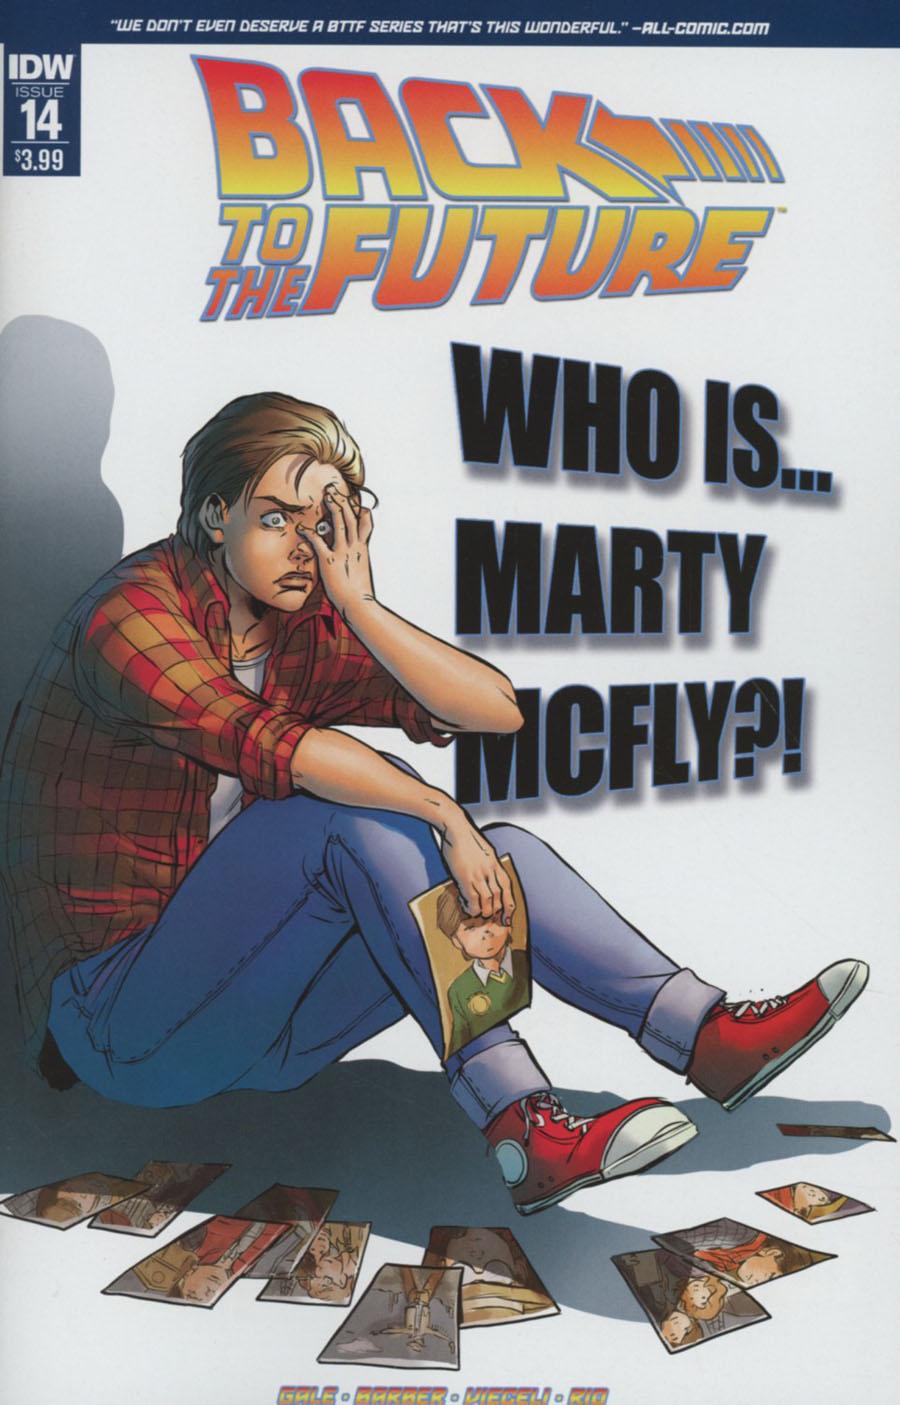 Back To The Future Vol. 2 #14